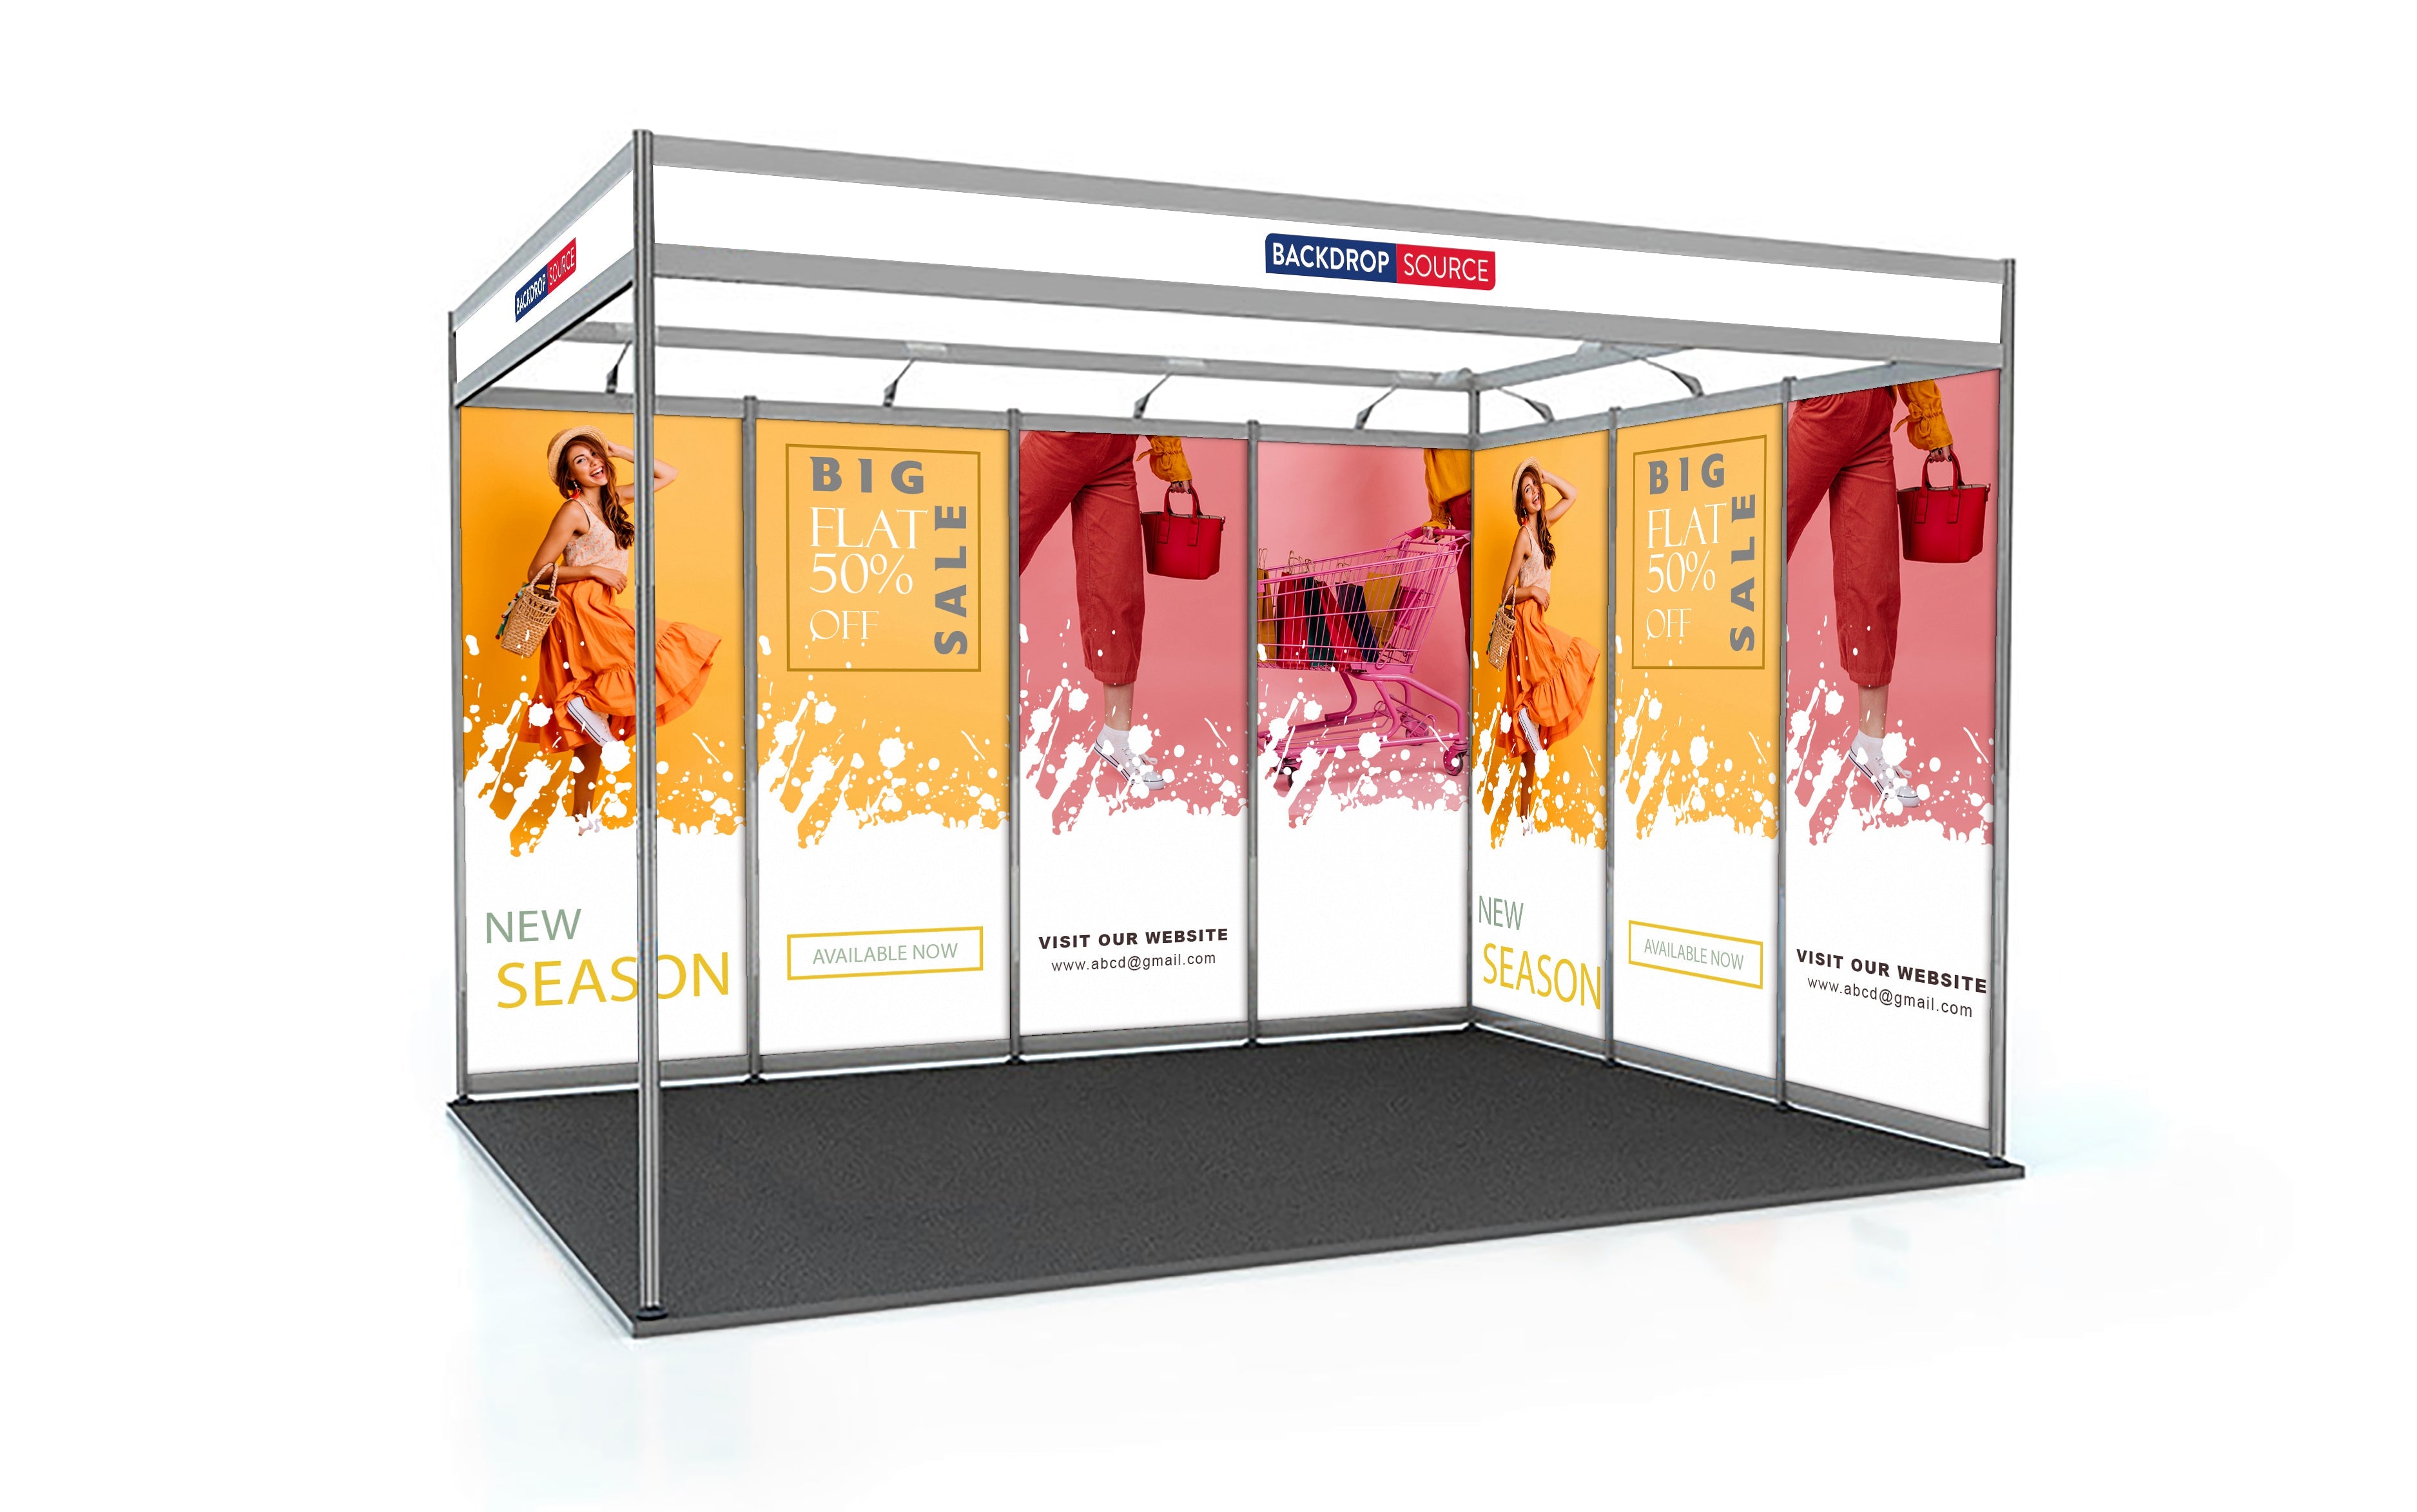 Shell scheme Exhibition Graphics for 4m Wide x 3m Depth Booth